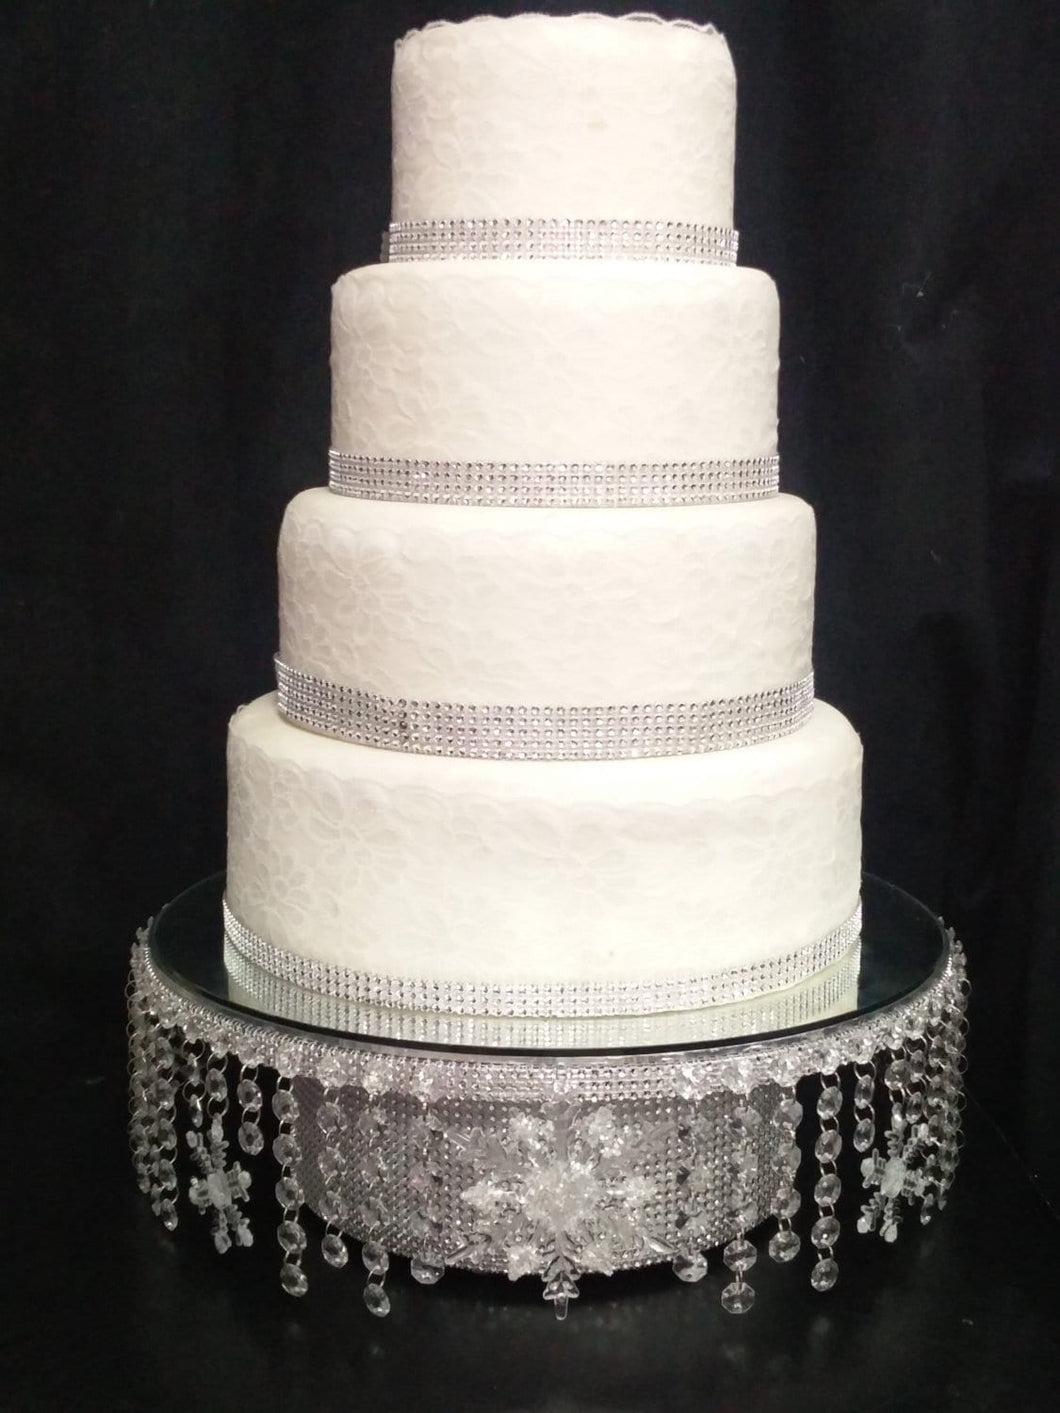 Snowflake  WEDDING Cake Stand Diamante cake stand for a Winter wedding by Crystal wedding uk